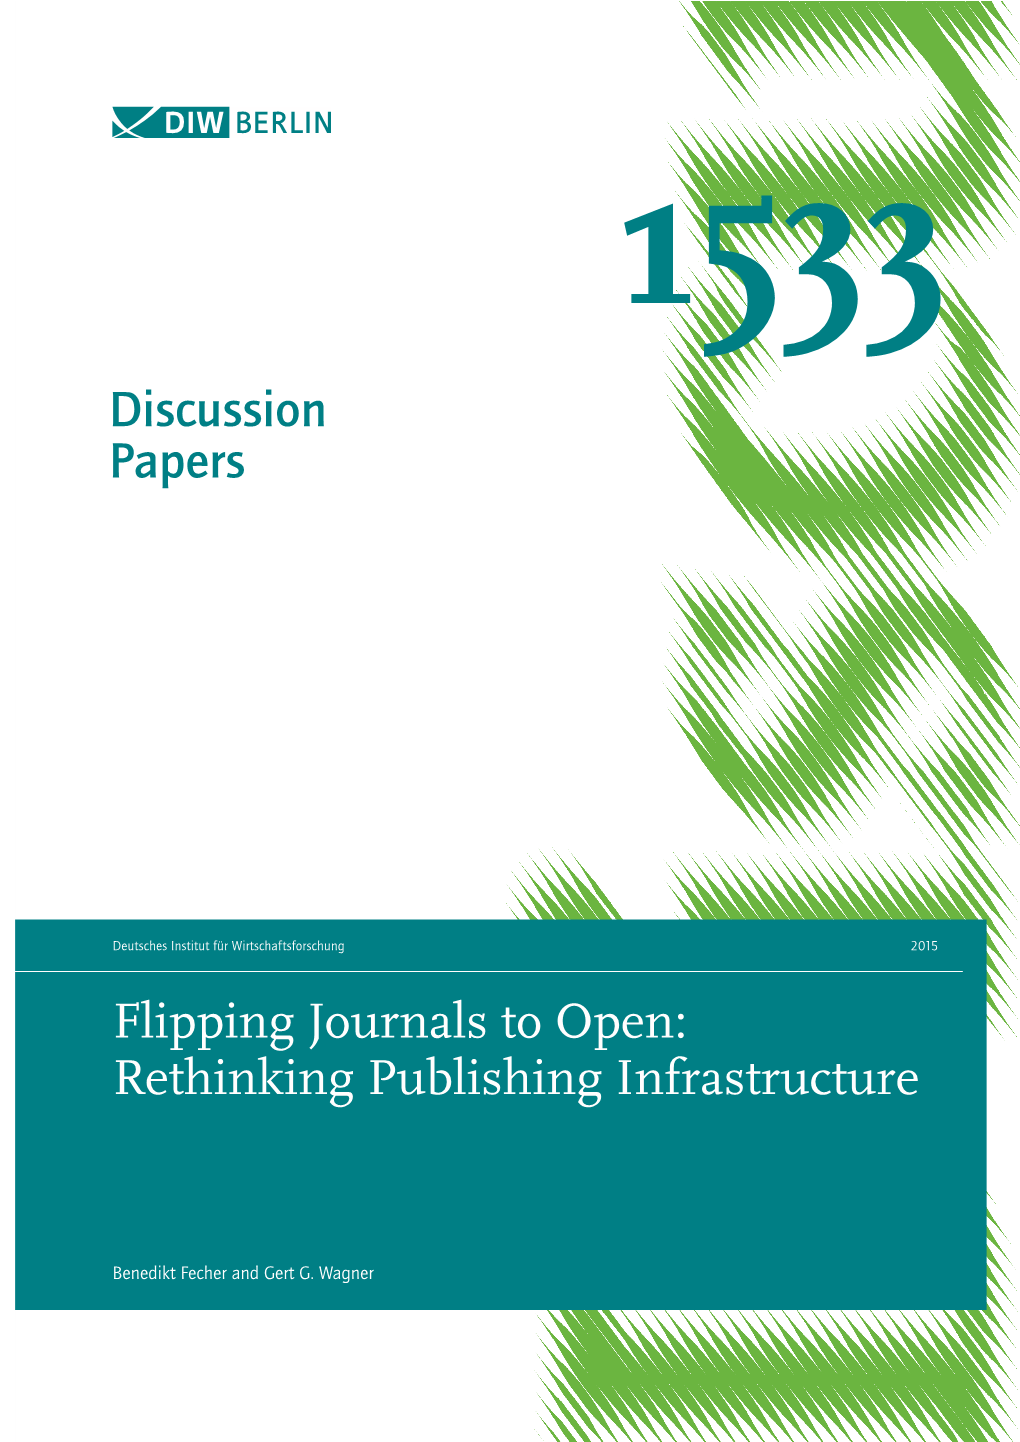 Flipping Journals to Open: Rethinking Publishing Infrastructure